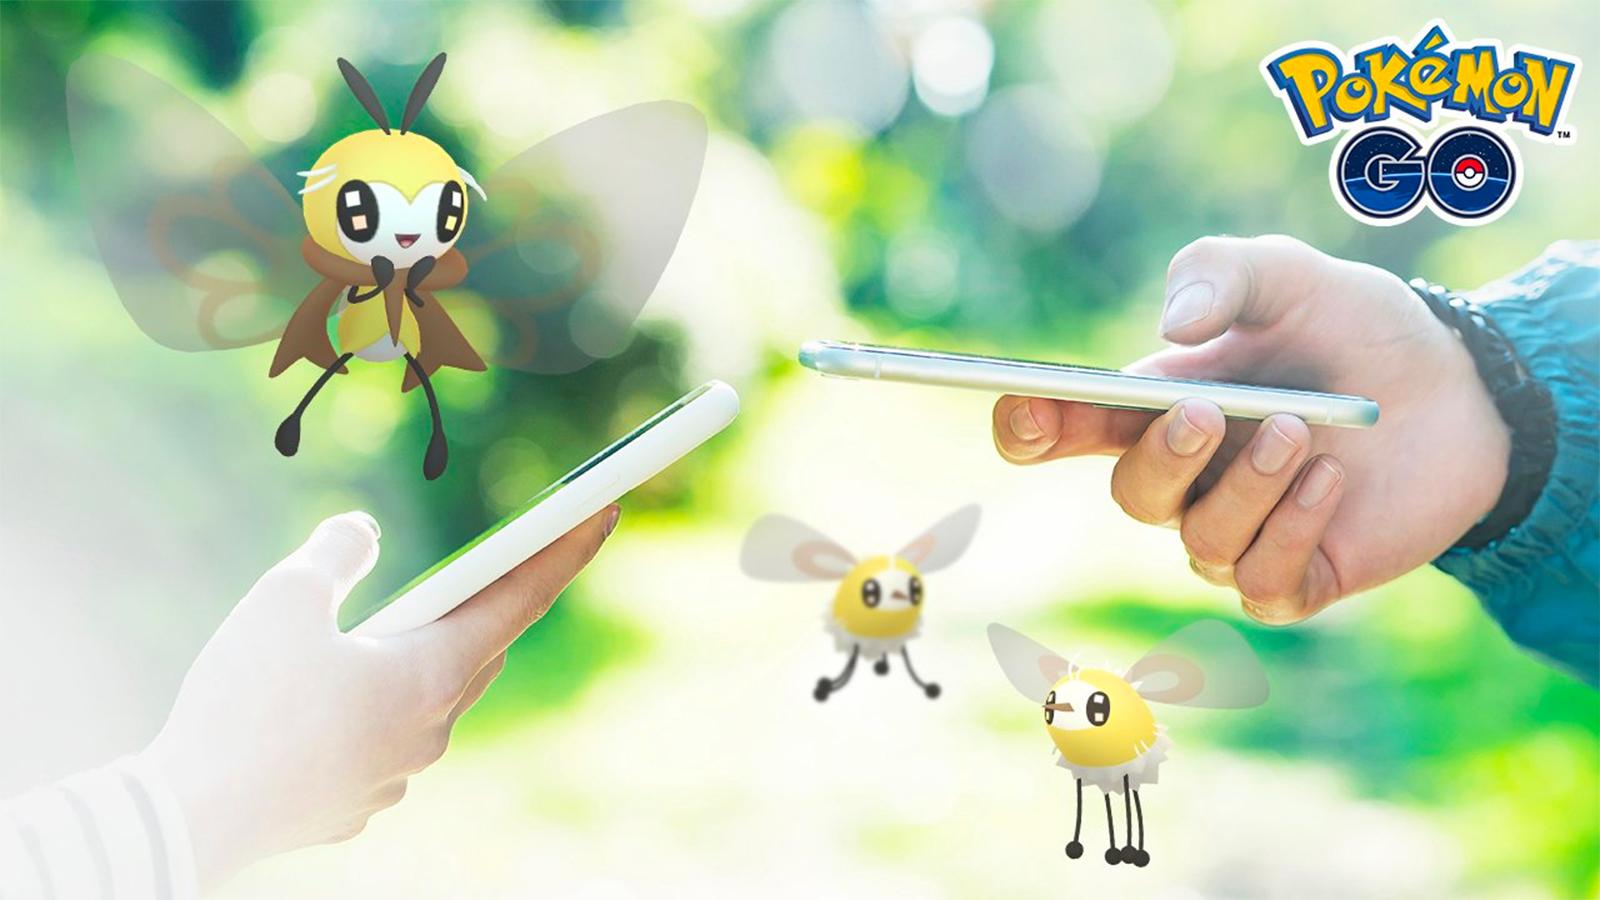 Cutiefly appearing in the Pokemon Go Spring into Spring Collection Challenge